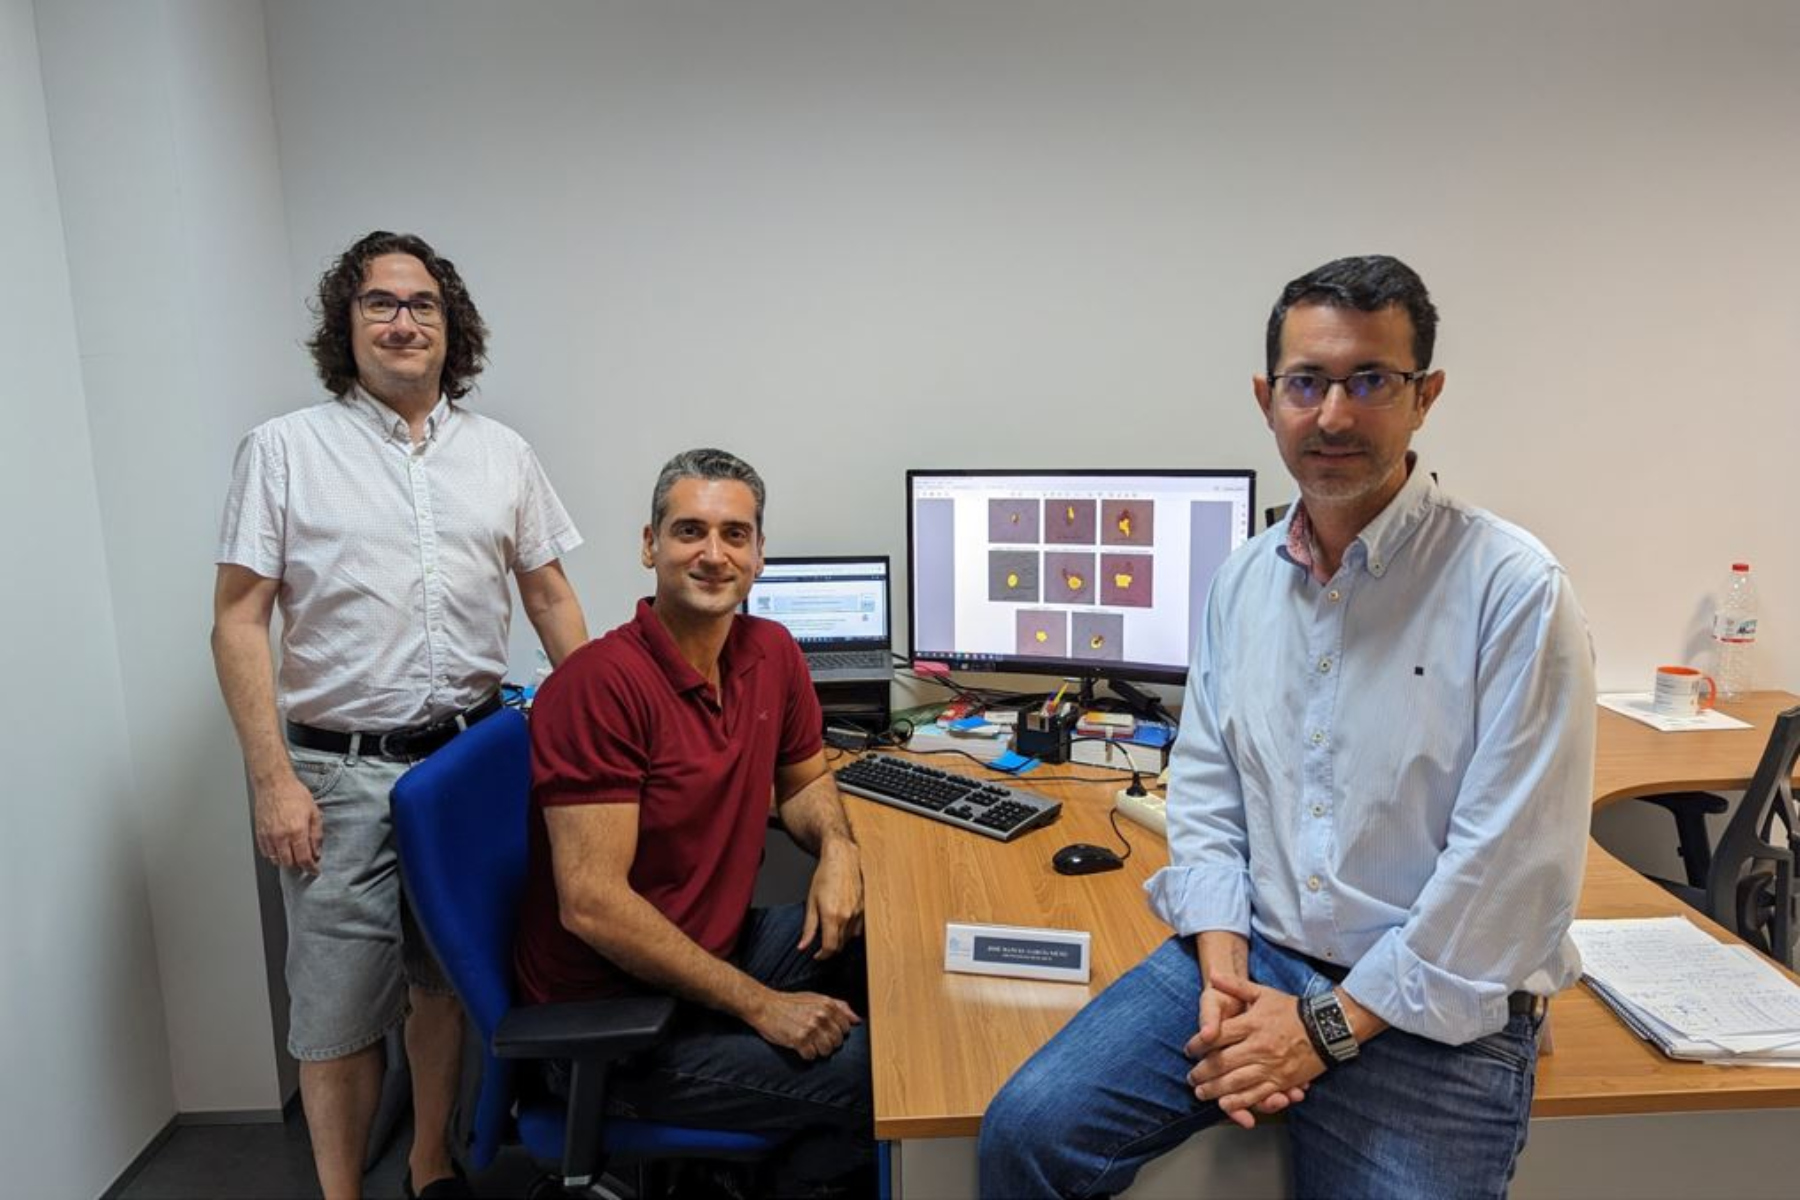 Khaos Group researchers participate in the creation of a tool based on Artificial Intelligence to improve the early detection of melanoma